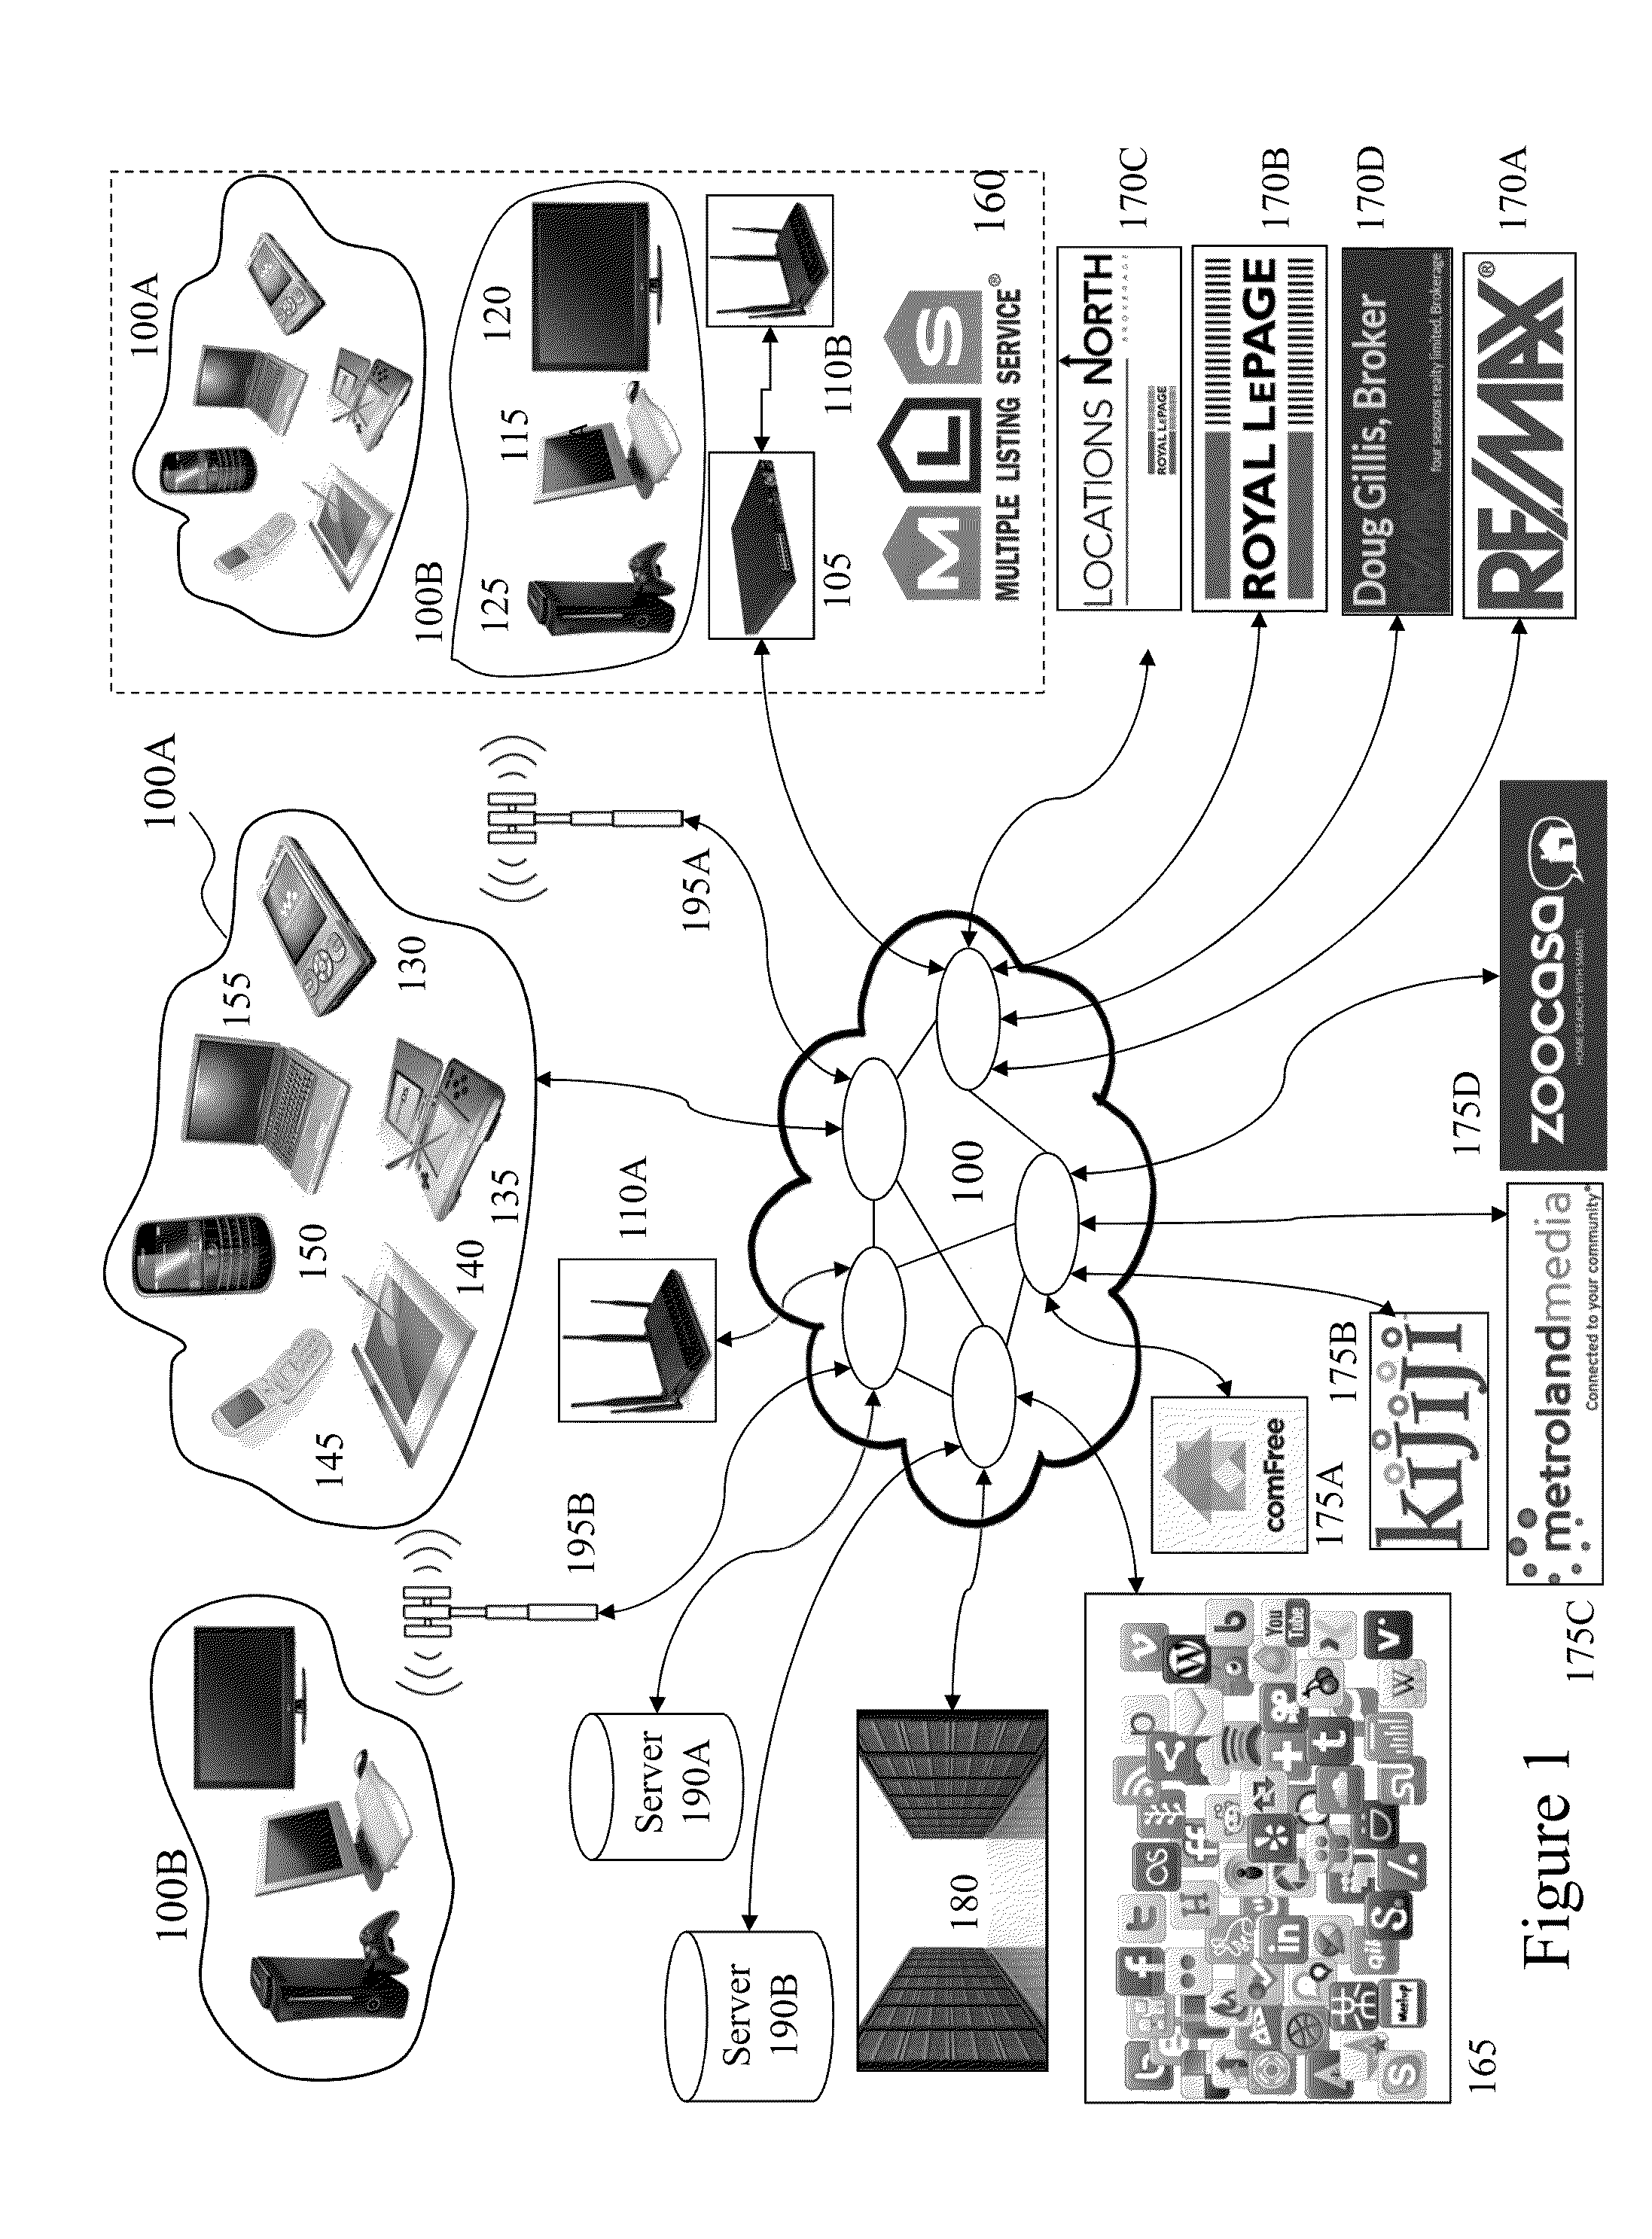 Dynamic contact management systems and methods